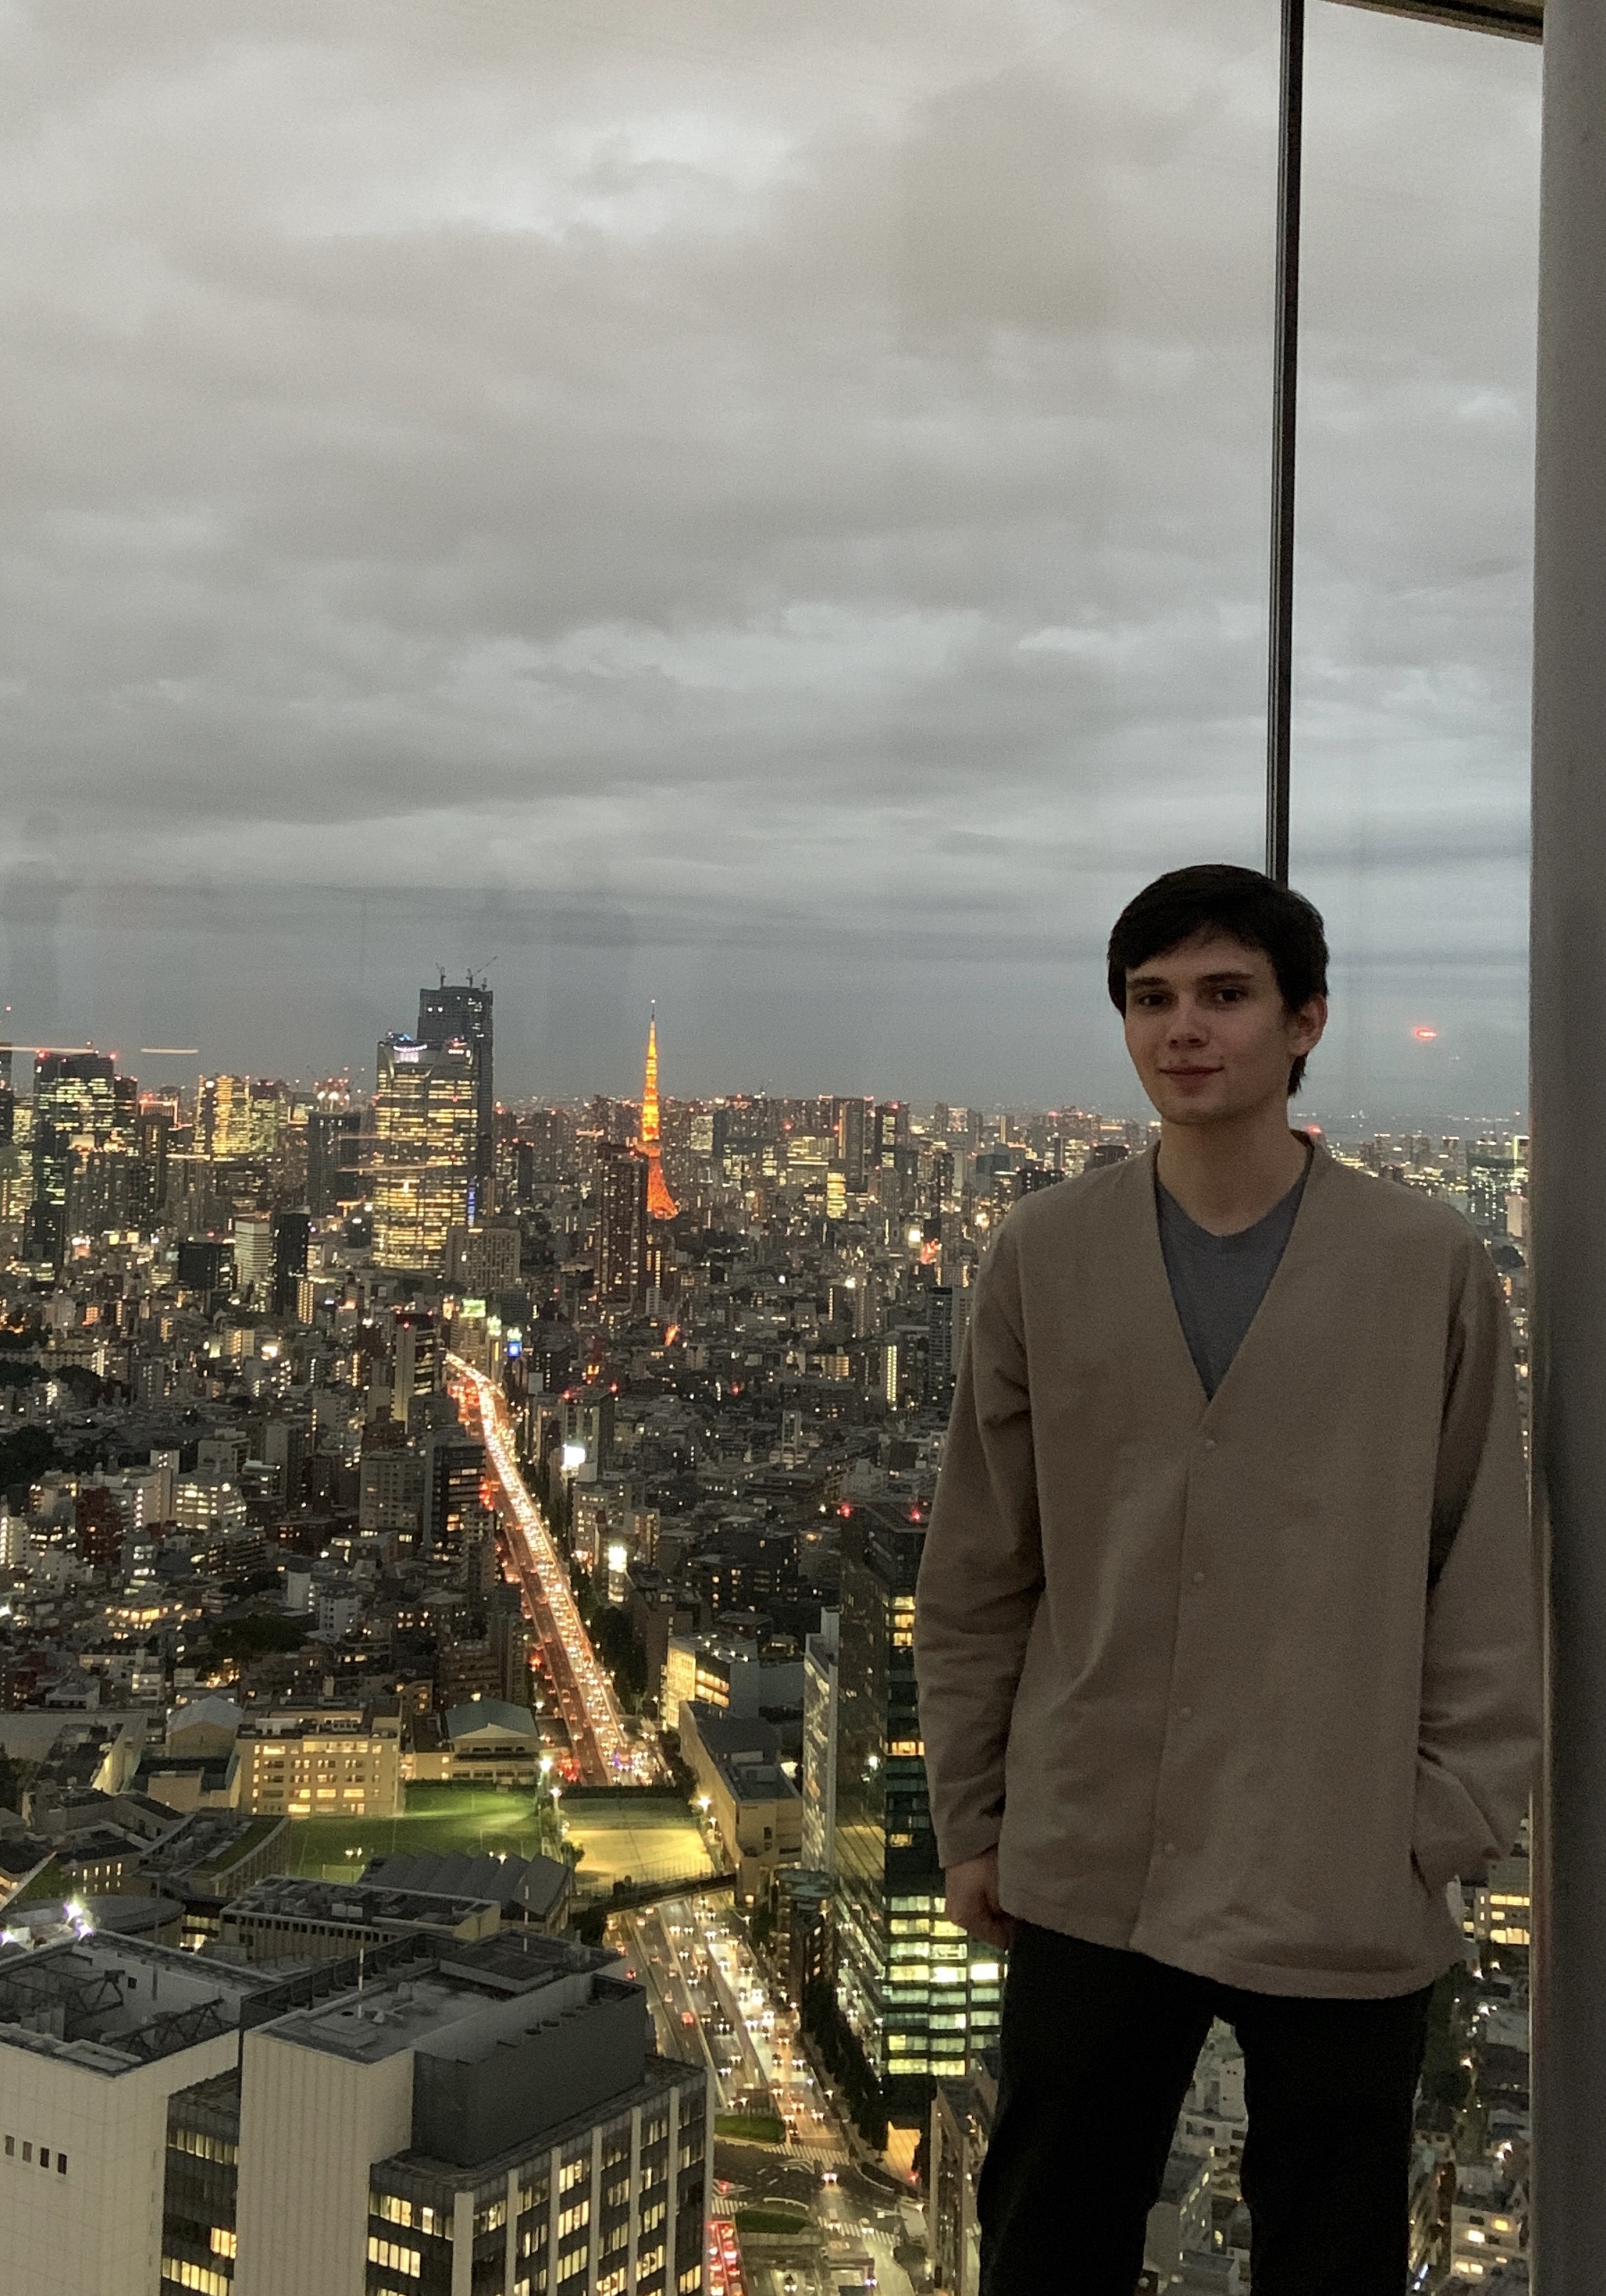 Eben stands smiling against a glass wall; beyond, the cityscape of Tokyo shines at sundown.